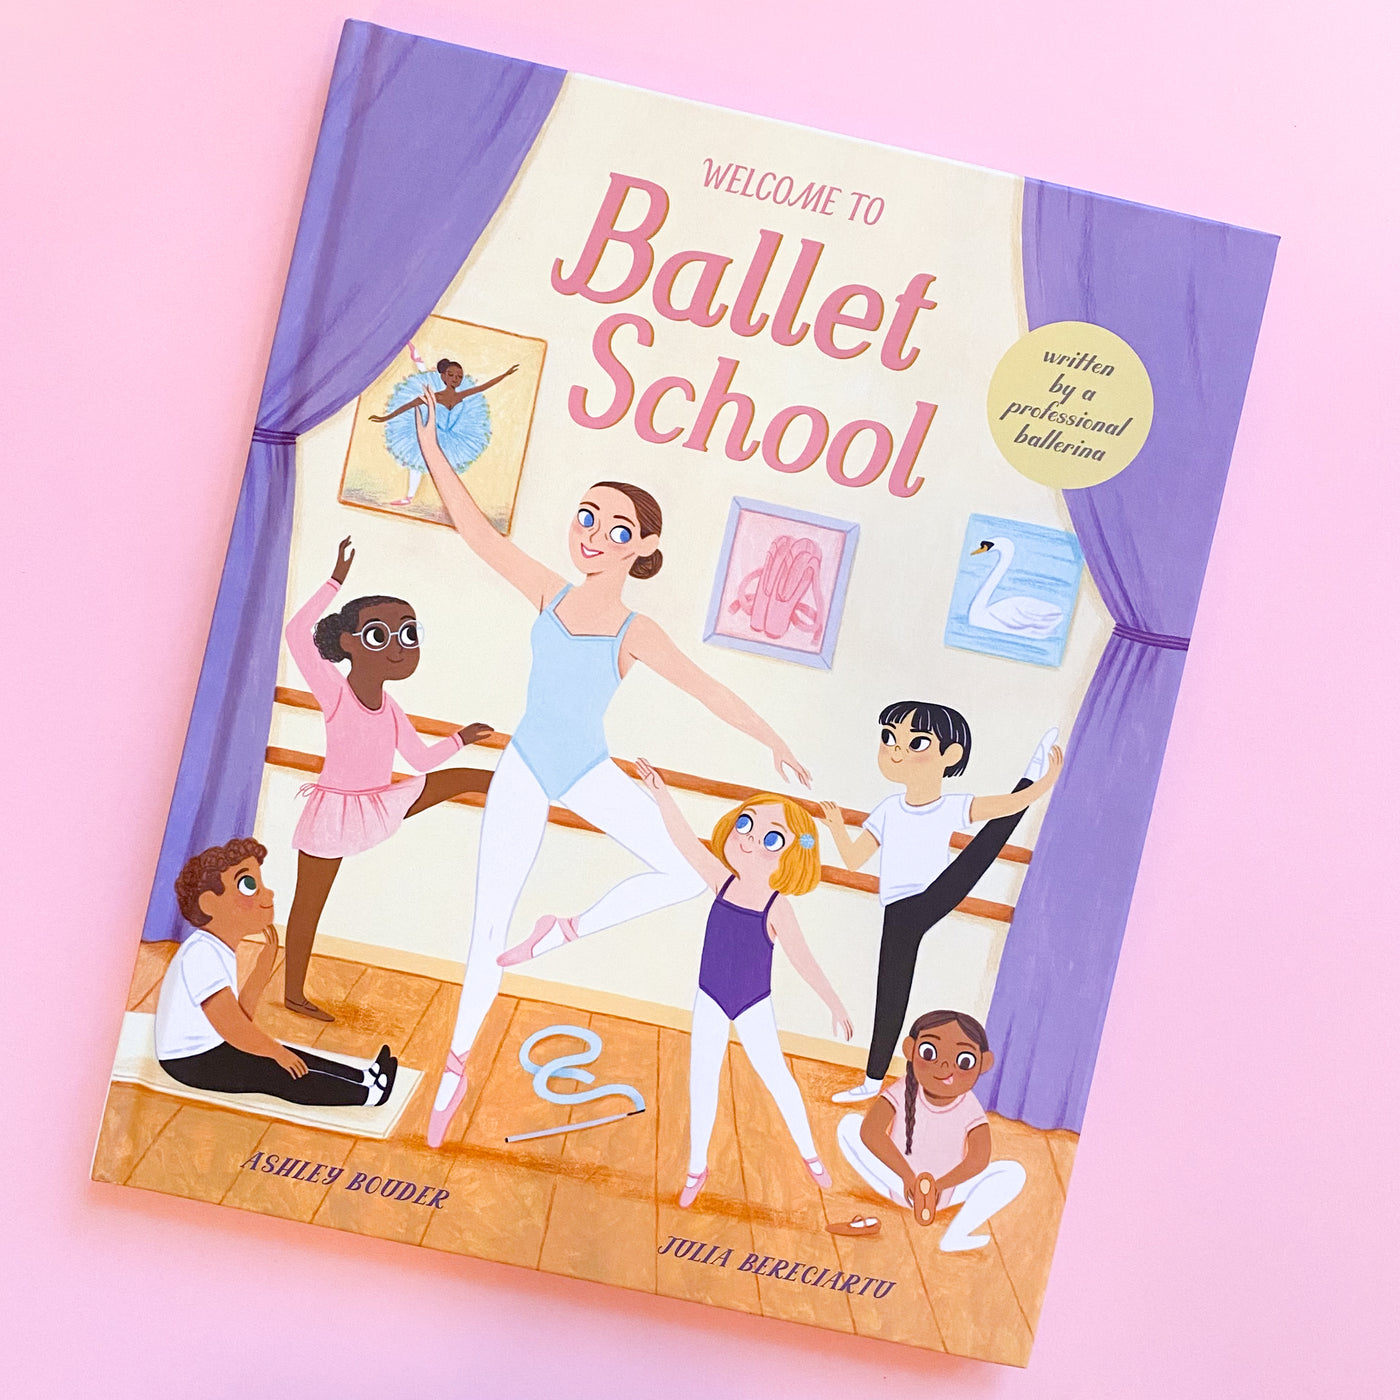 Welcome to Ballet School by Ashley Bouder and Julia Bereciartu